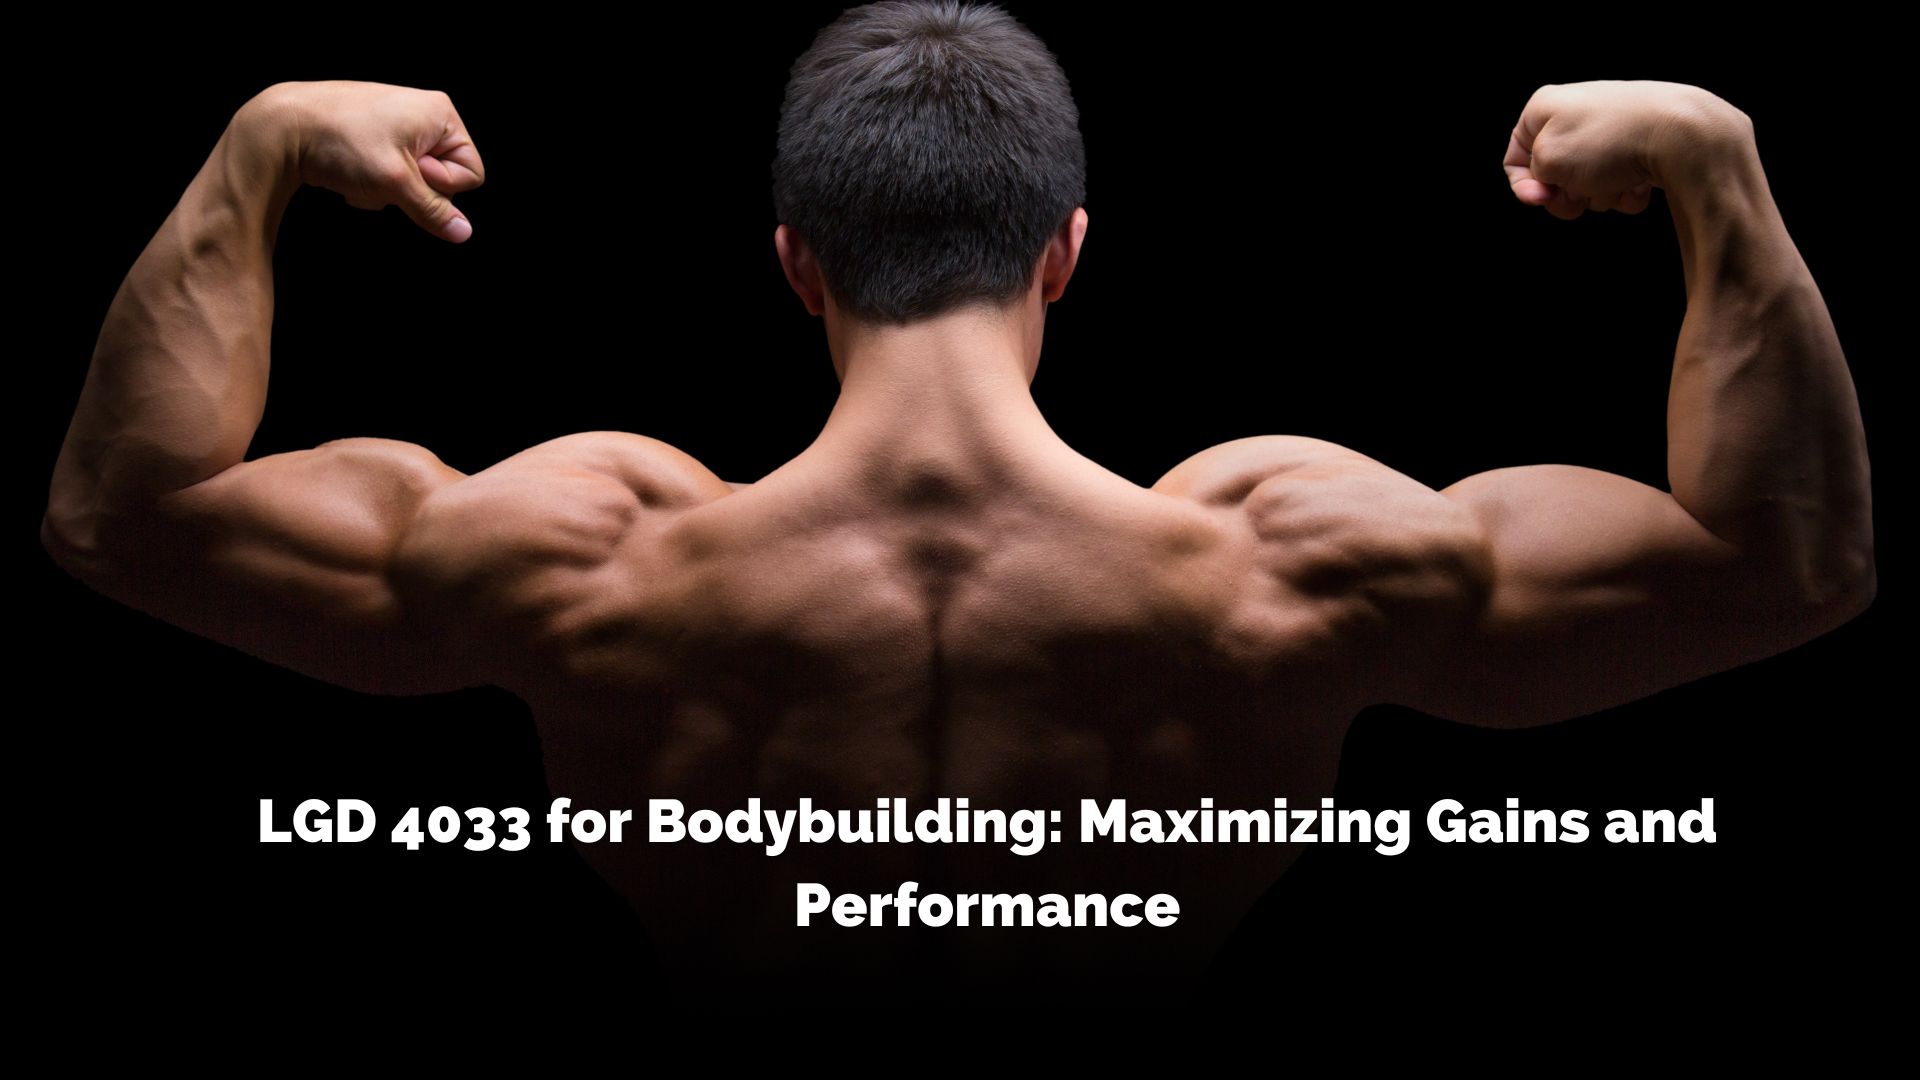 LGD 4033 for Bodybuilding: Maximizing Gains and Performance